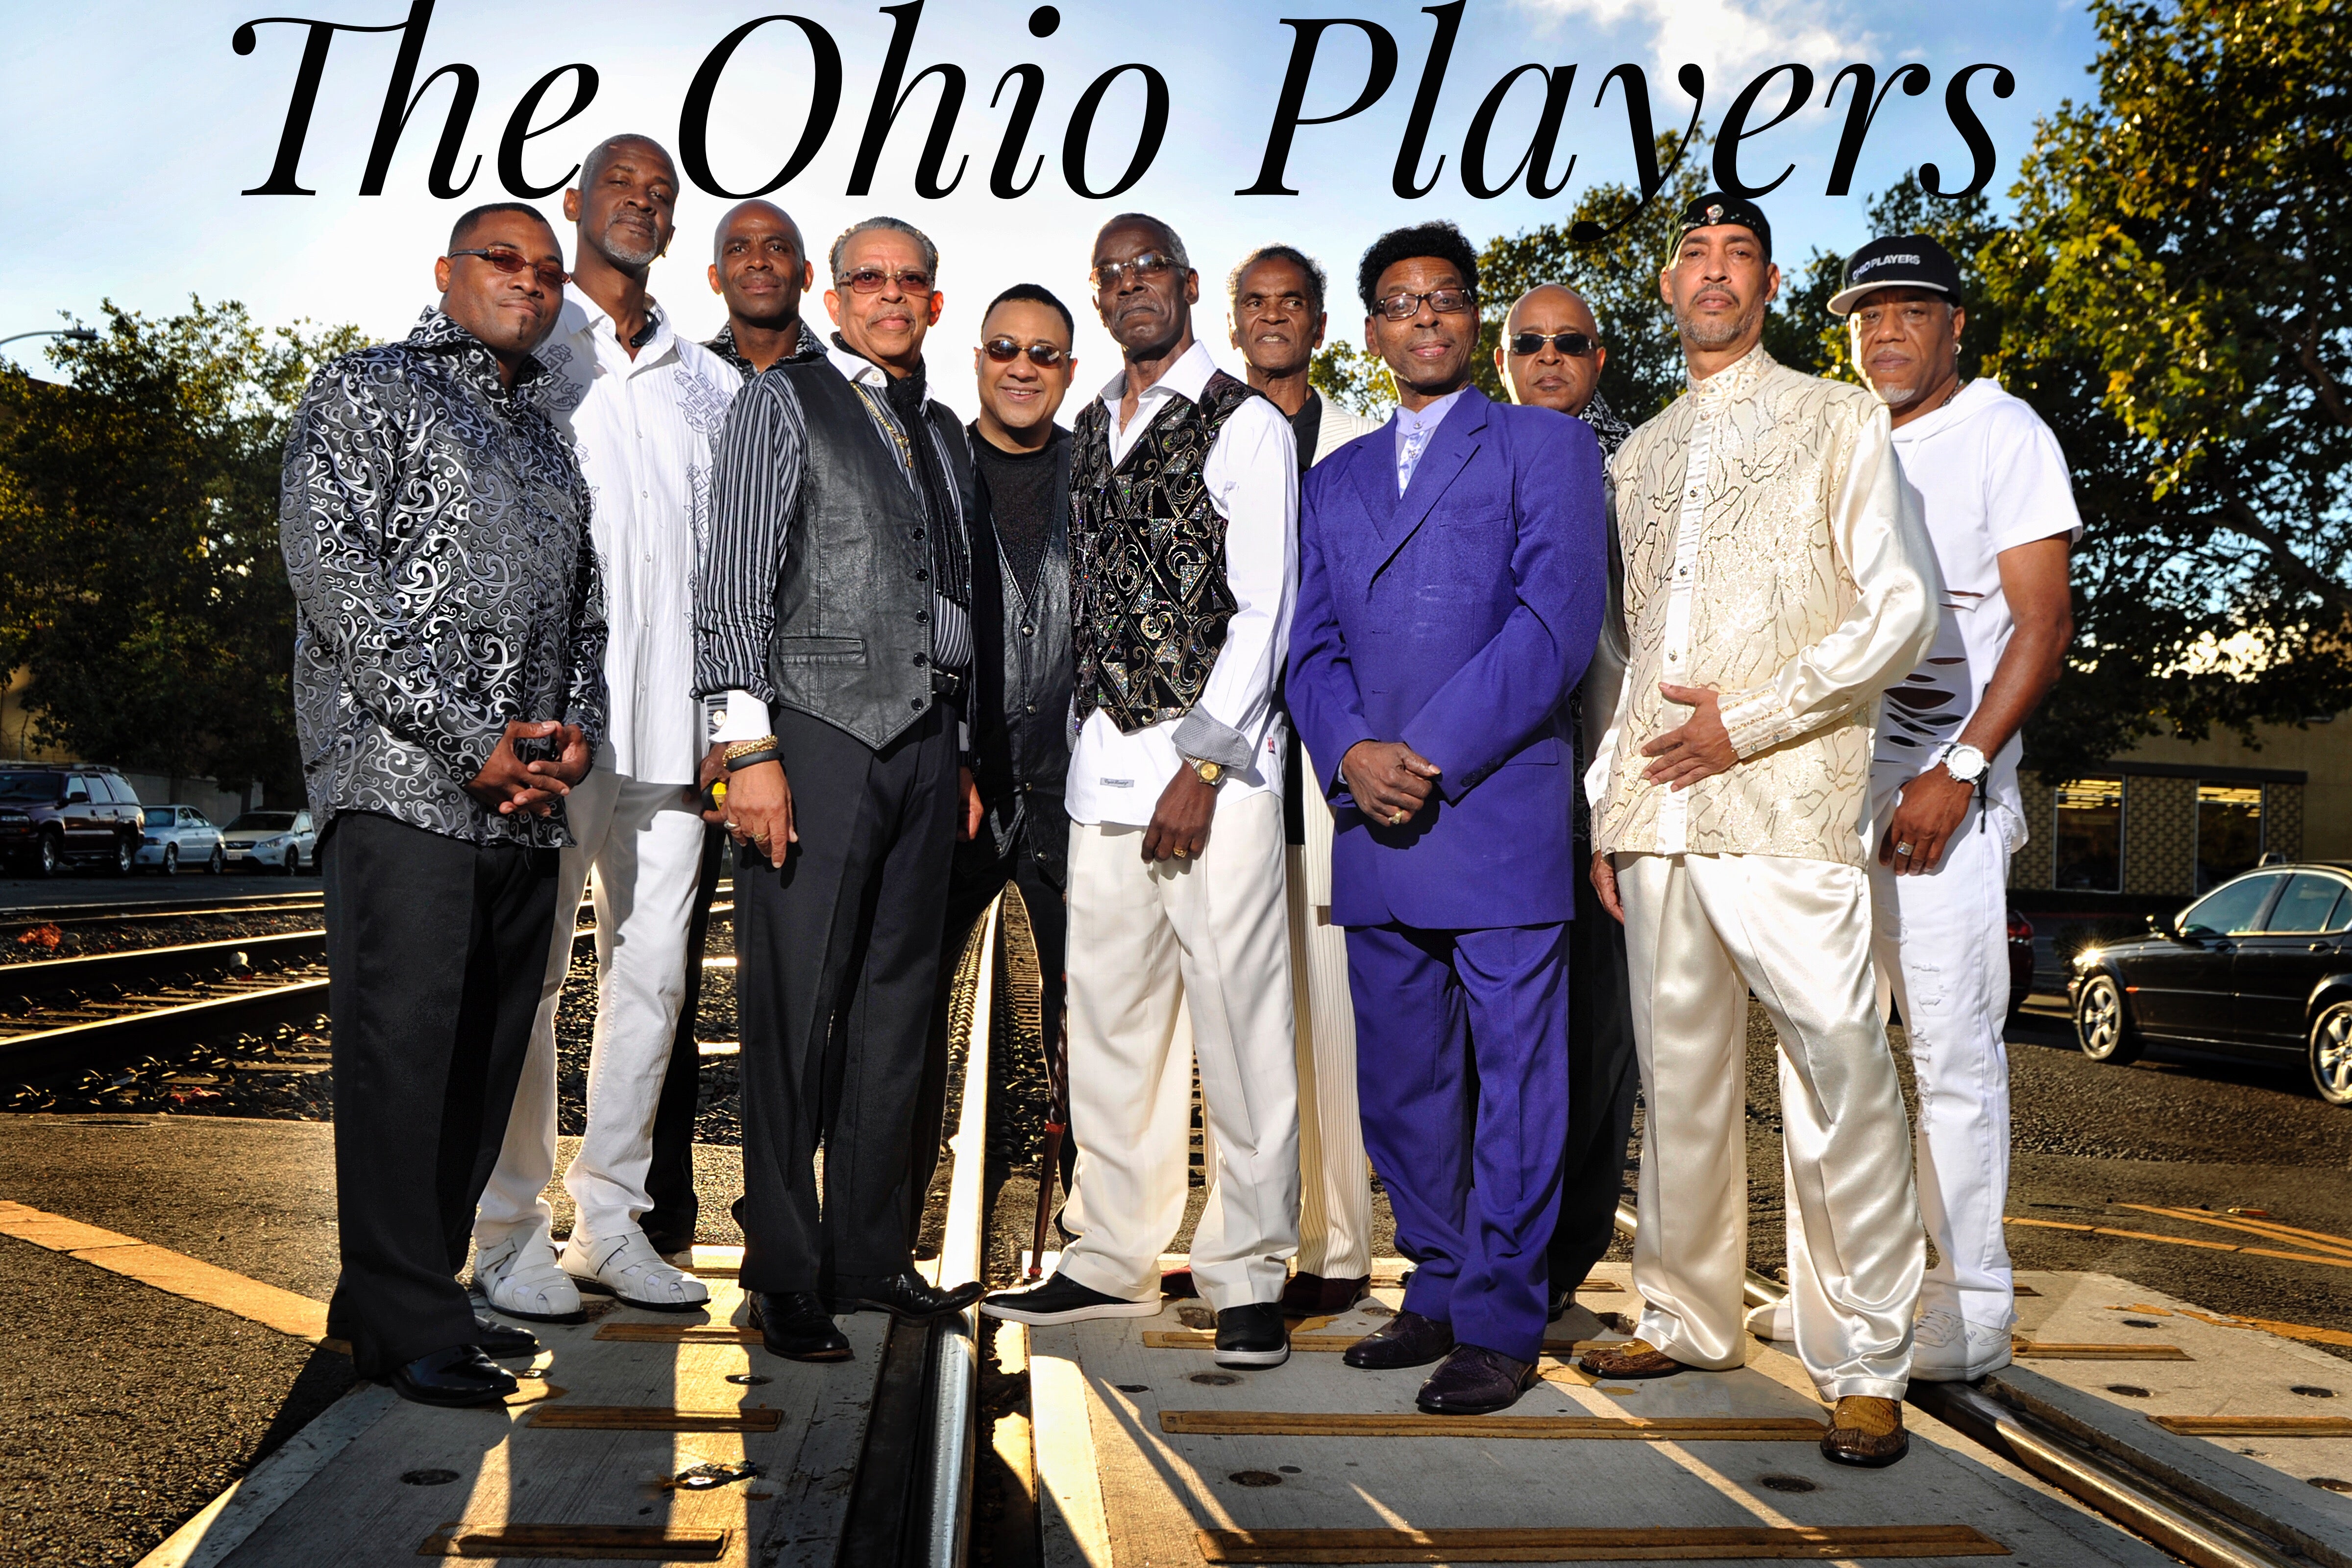 The Ohio Players and Midnight Star